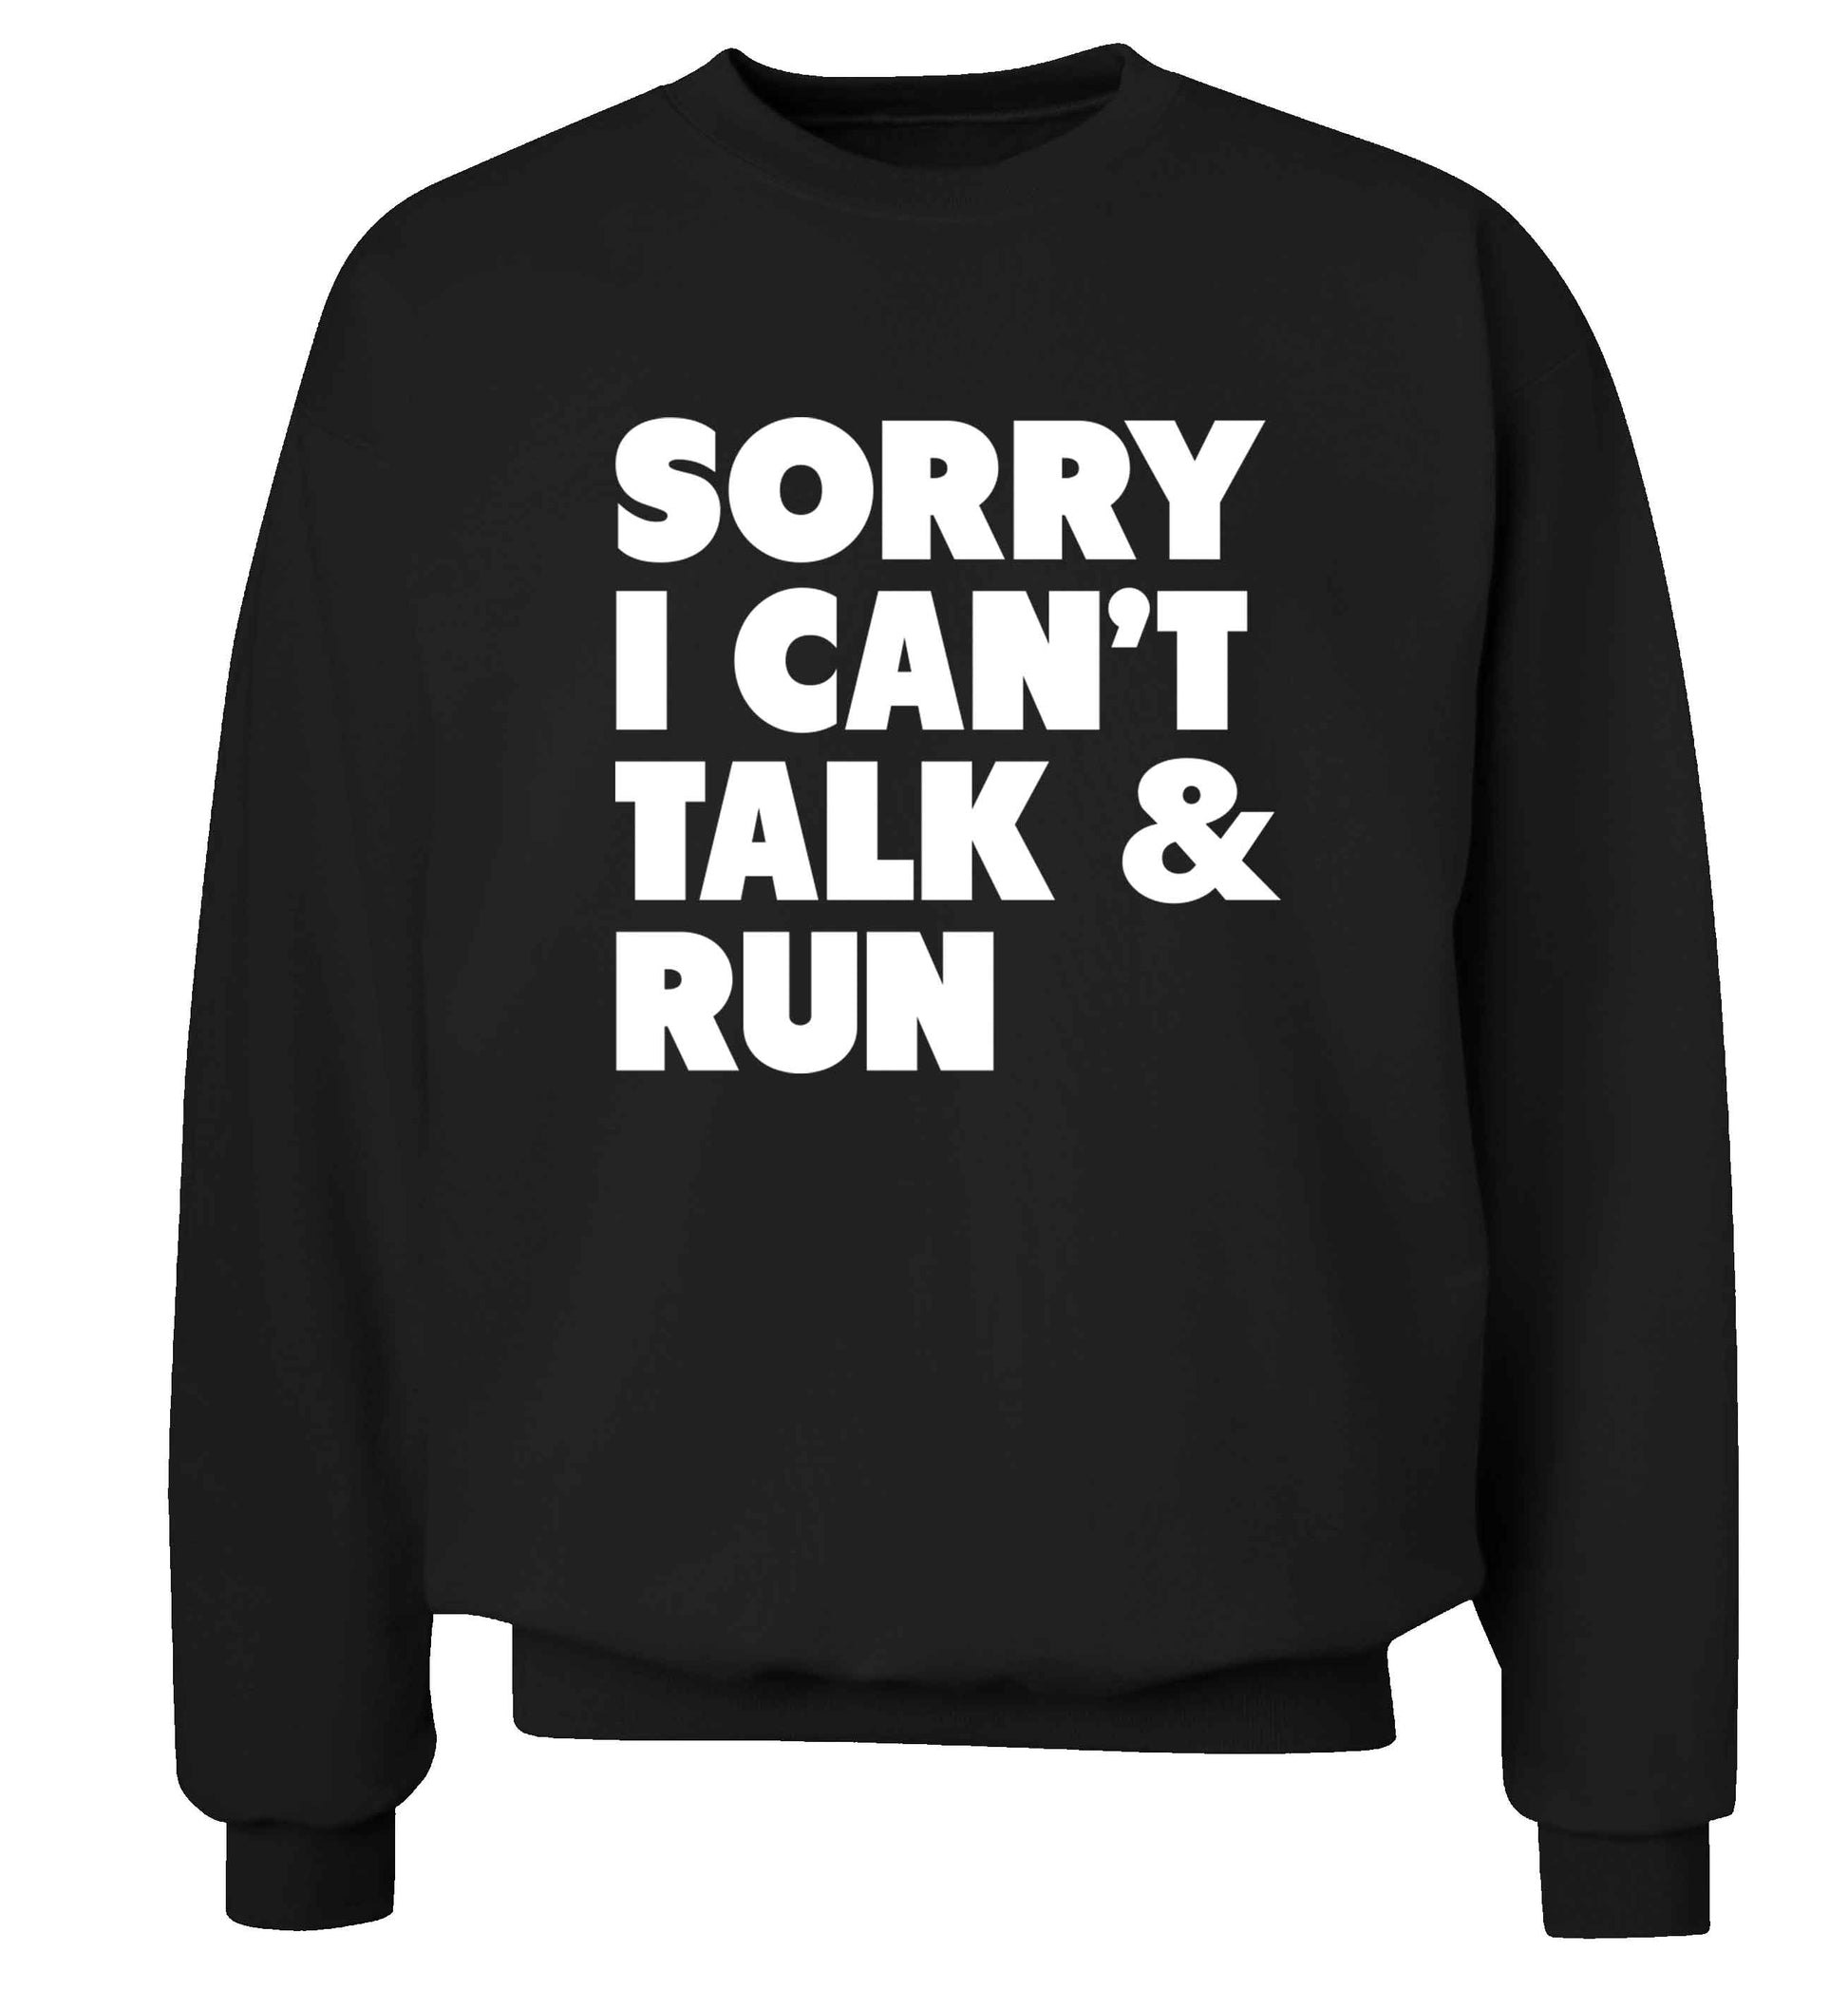 Sorry I can't talk and run adult's unisex black sweater 2XL